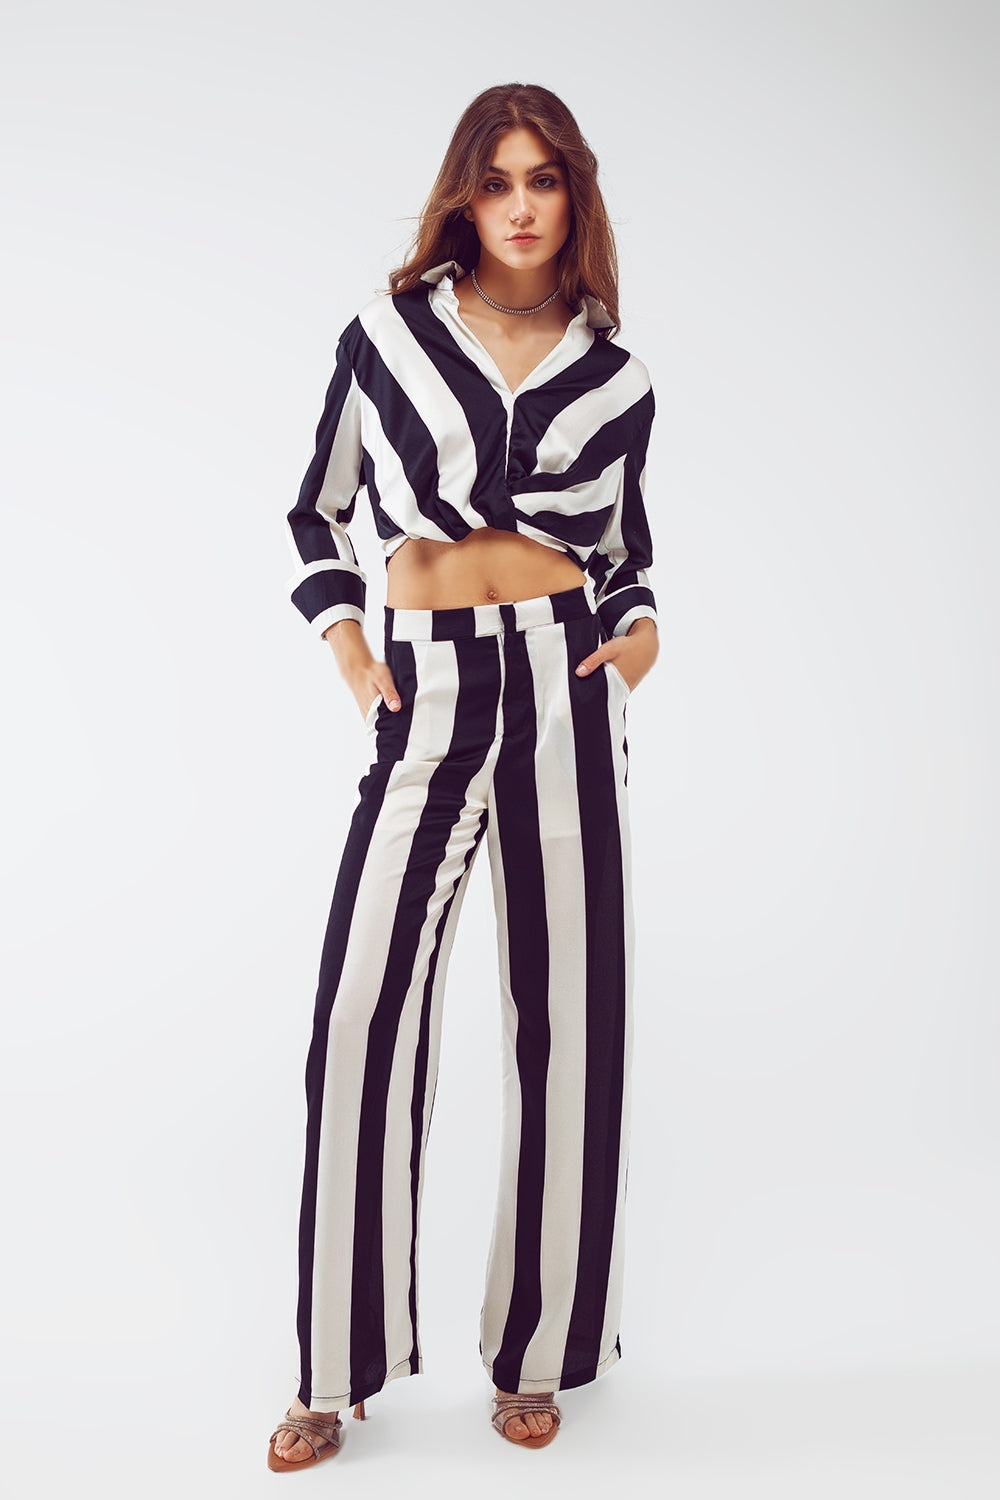 Crop Shirt With Knot Detail in Black and White Stripes - Szua Store